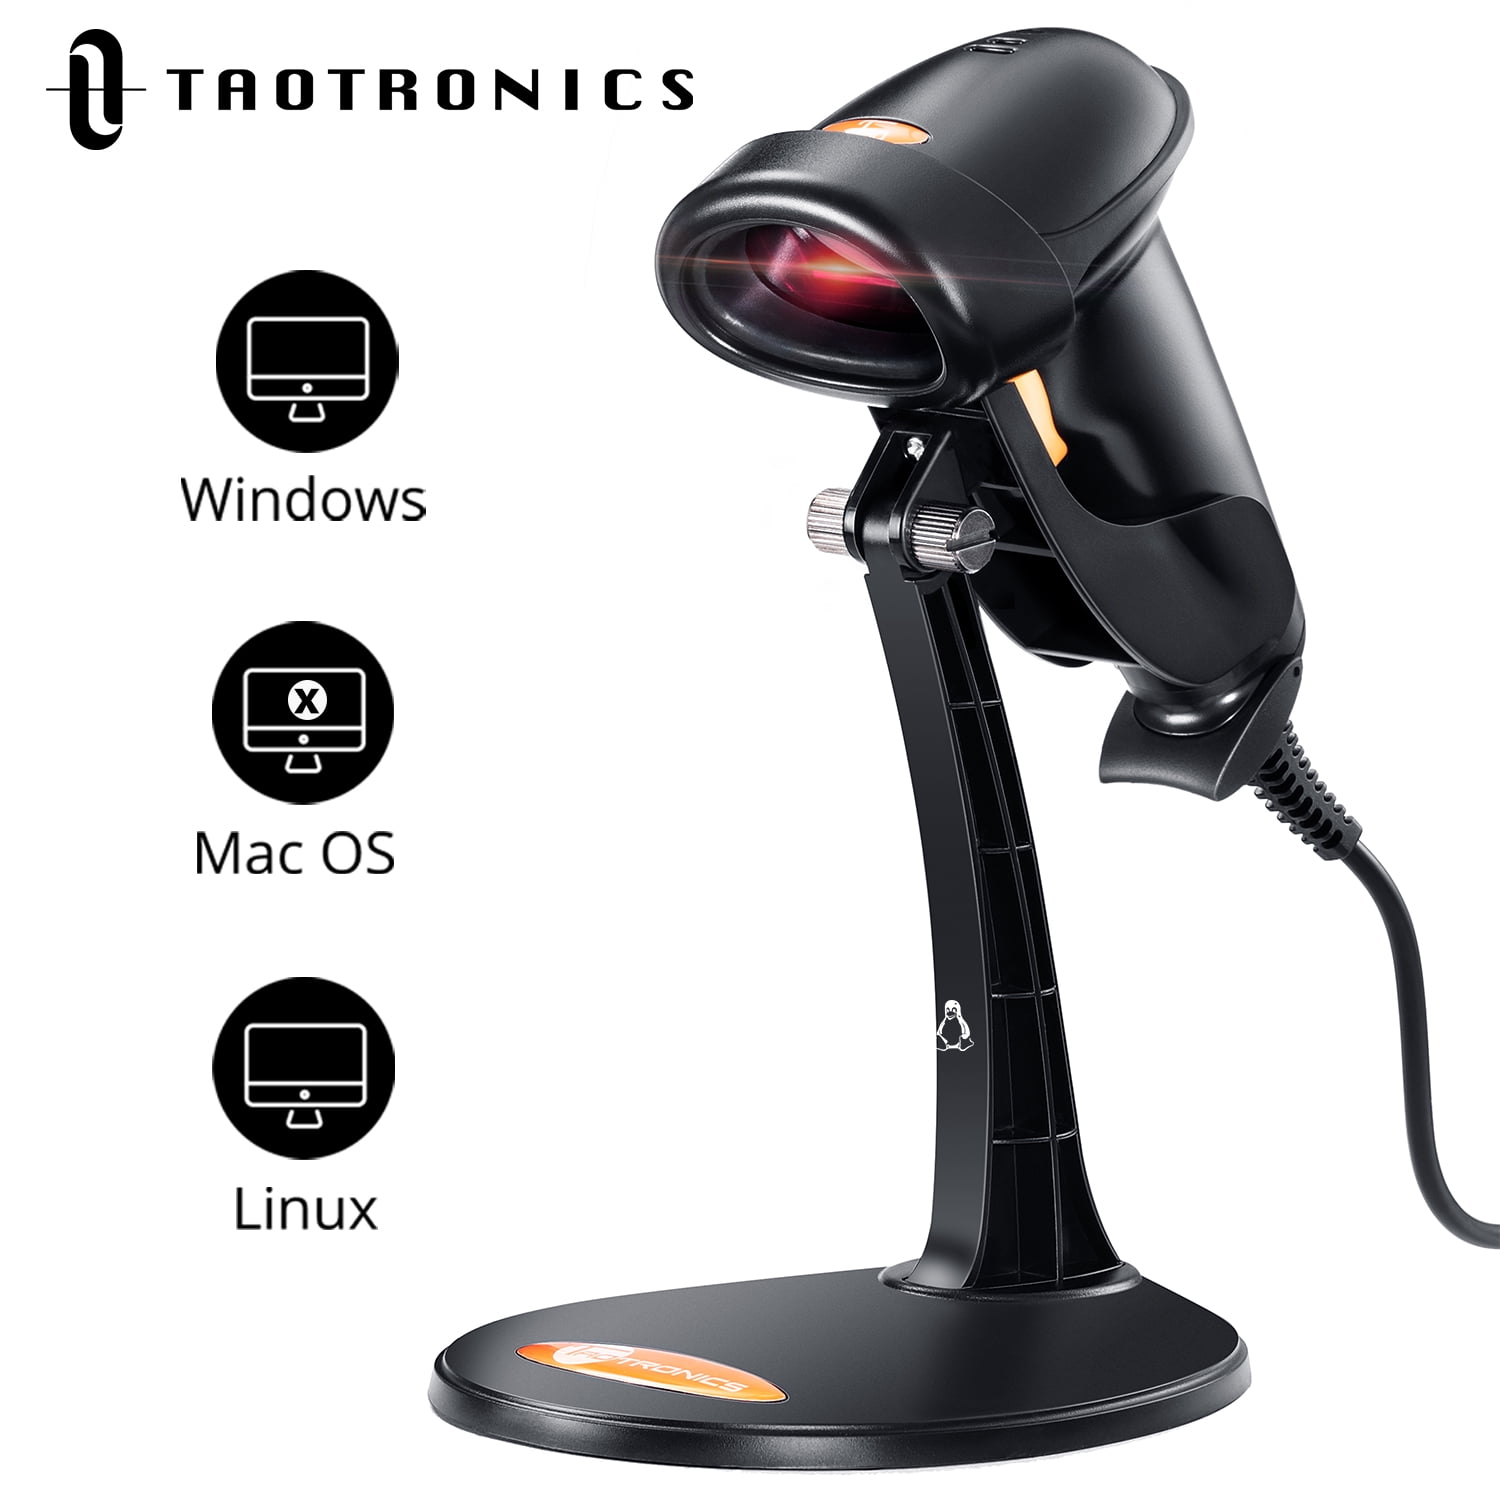 USB Professional Automatic Barcode Scanner Scanning Barcode Bar-code Reader with Hands Free Adjustable Stand Black Advanced Very Fast